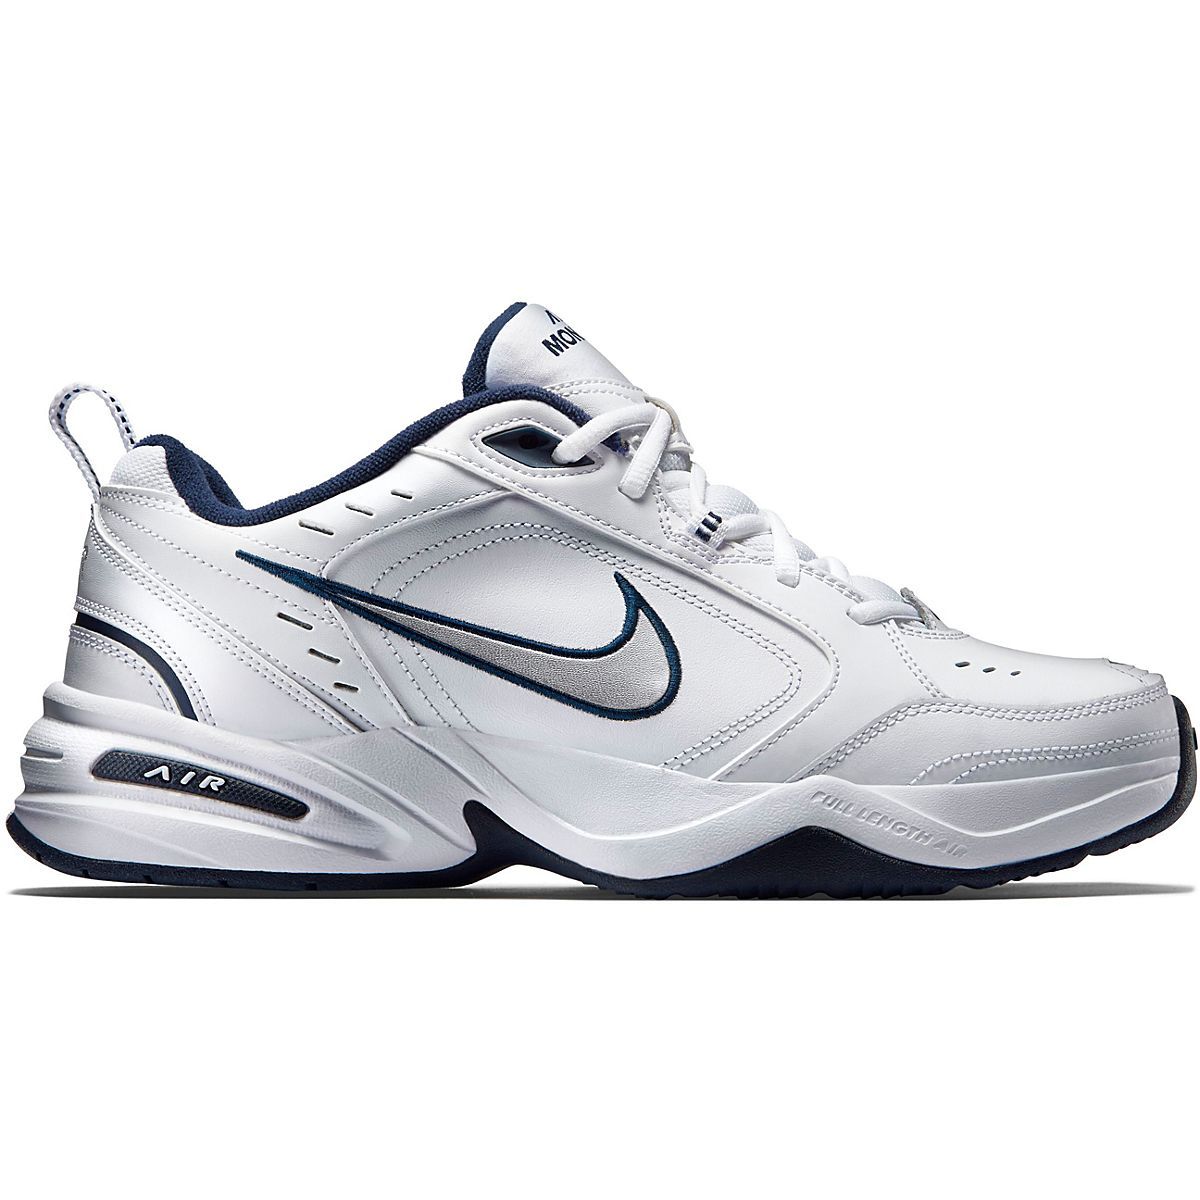 Nike Men's Air Monarch IV Training Shoes | Academy | Academy Sports + Outdoors